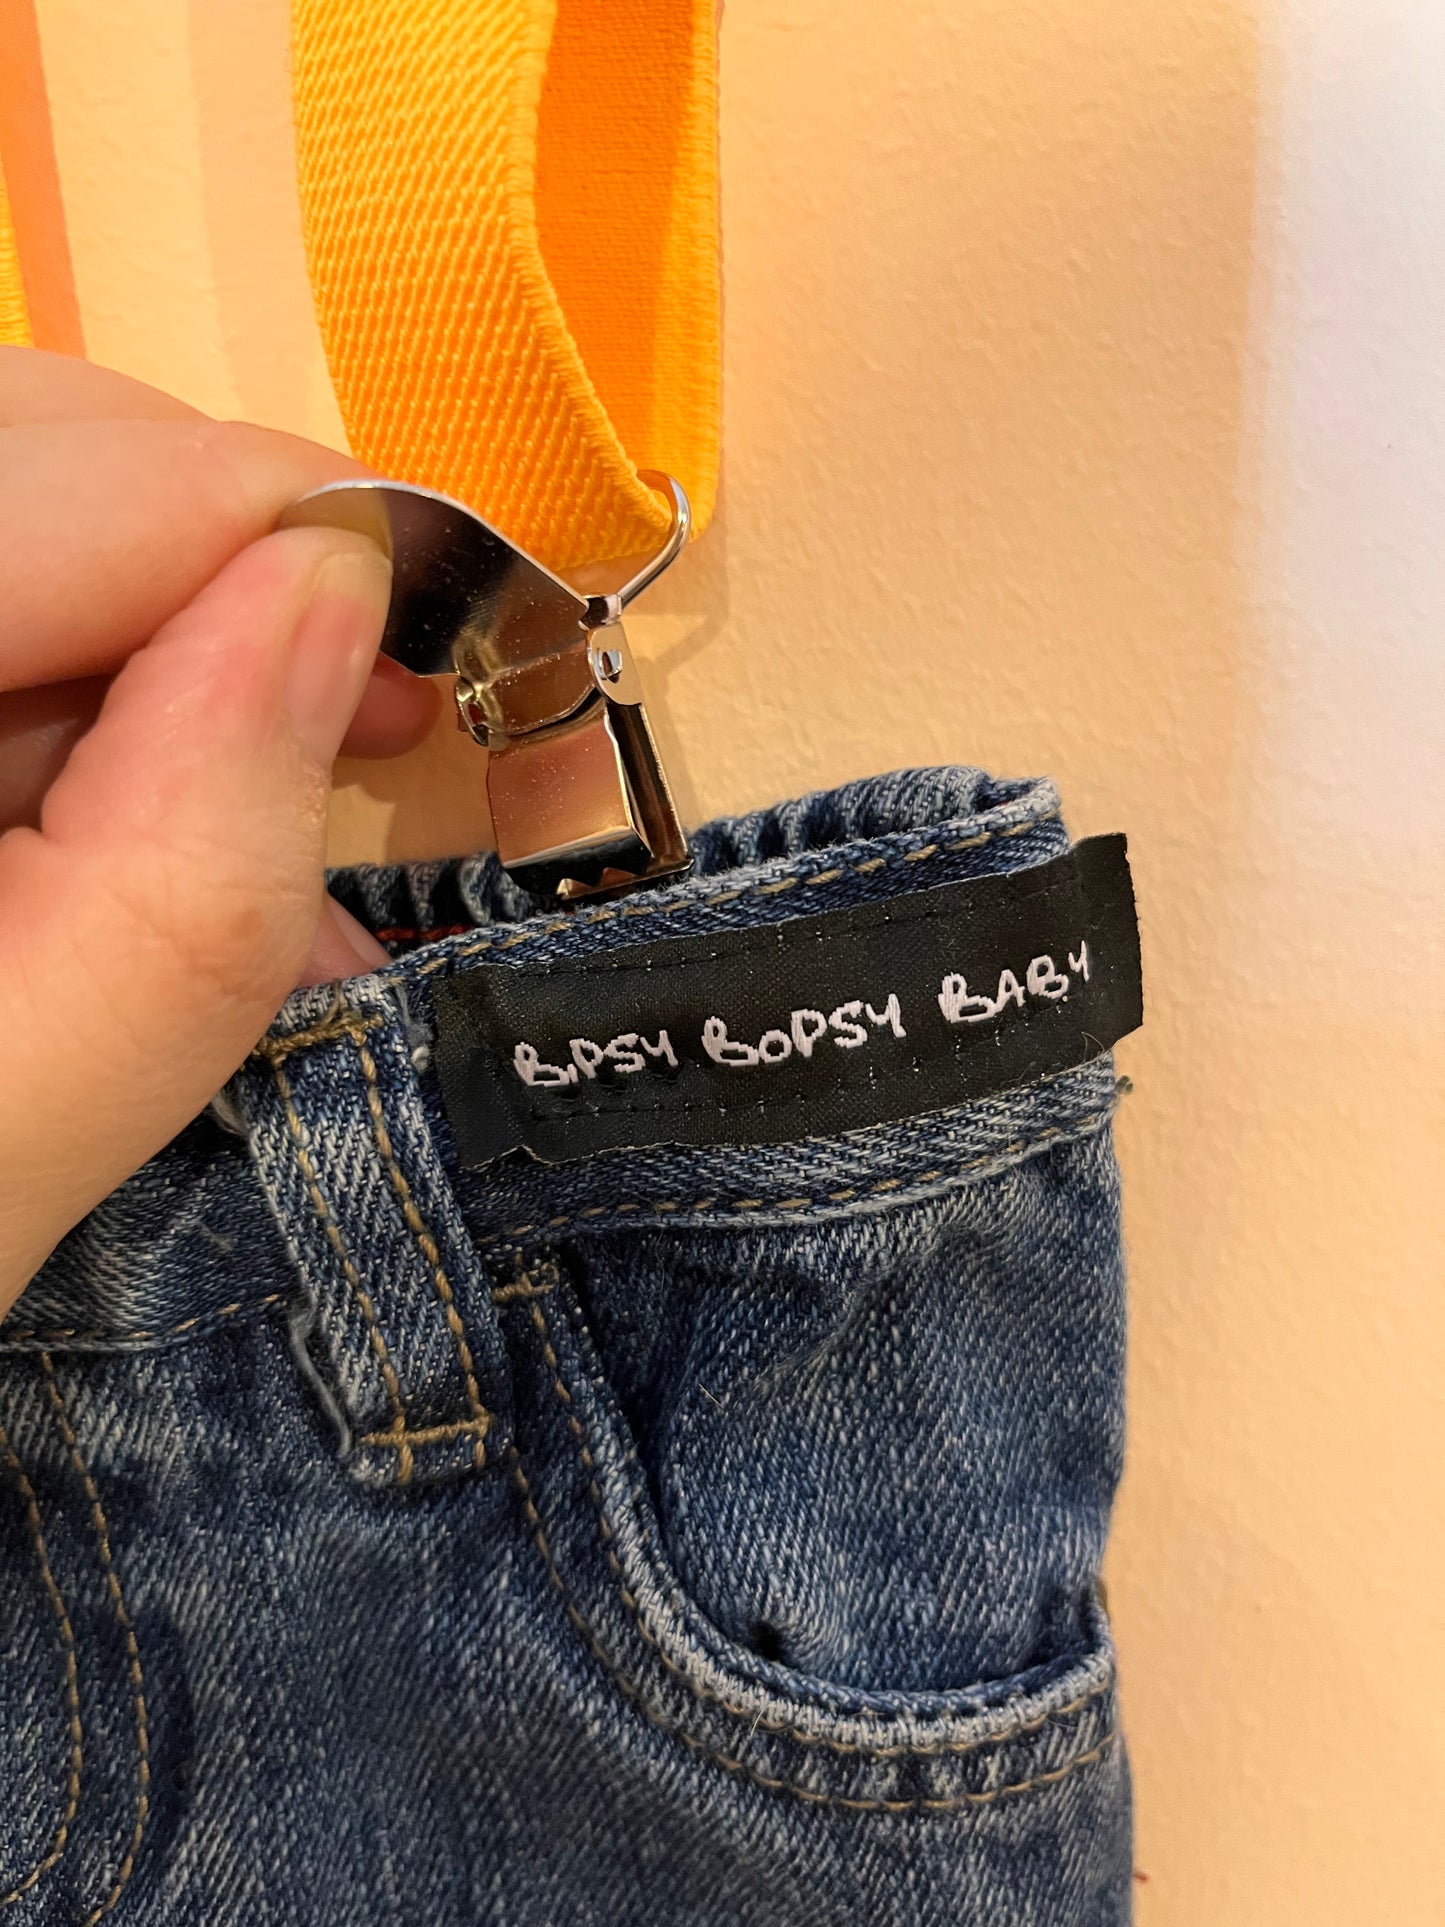 Bipsy Bopsy Baby Hand-Painted Jeans With Suspenders (6M)